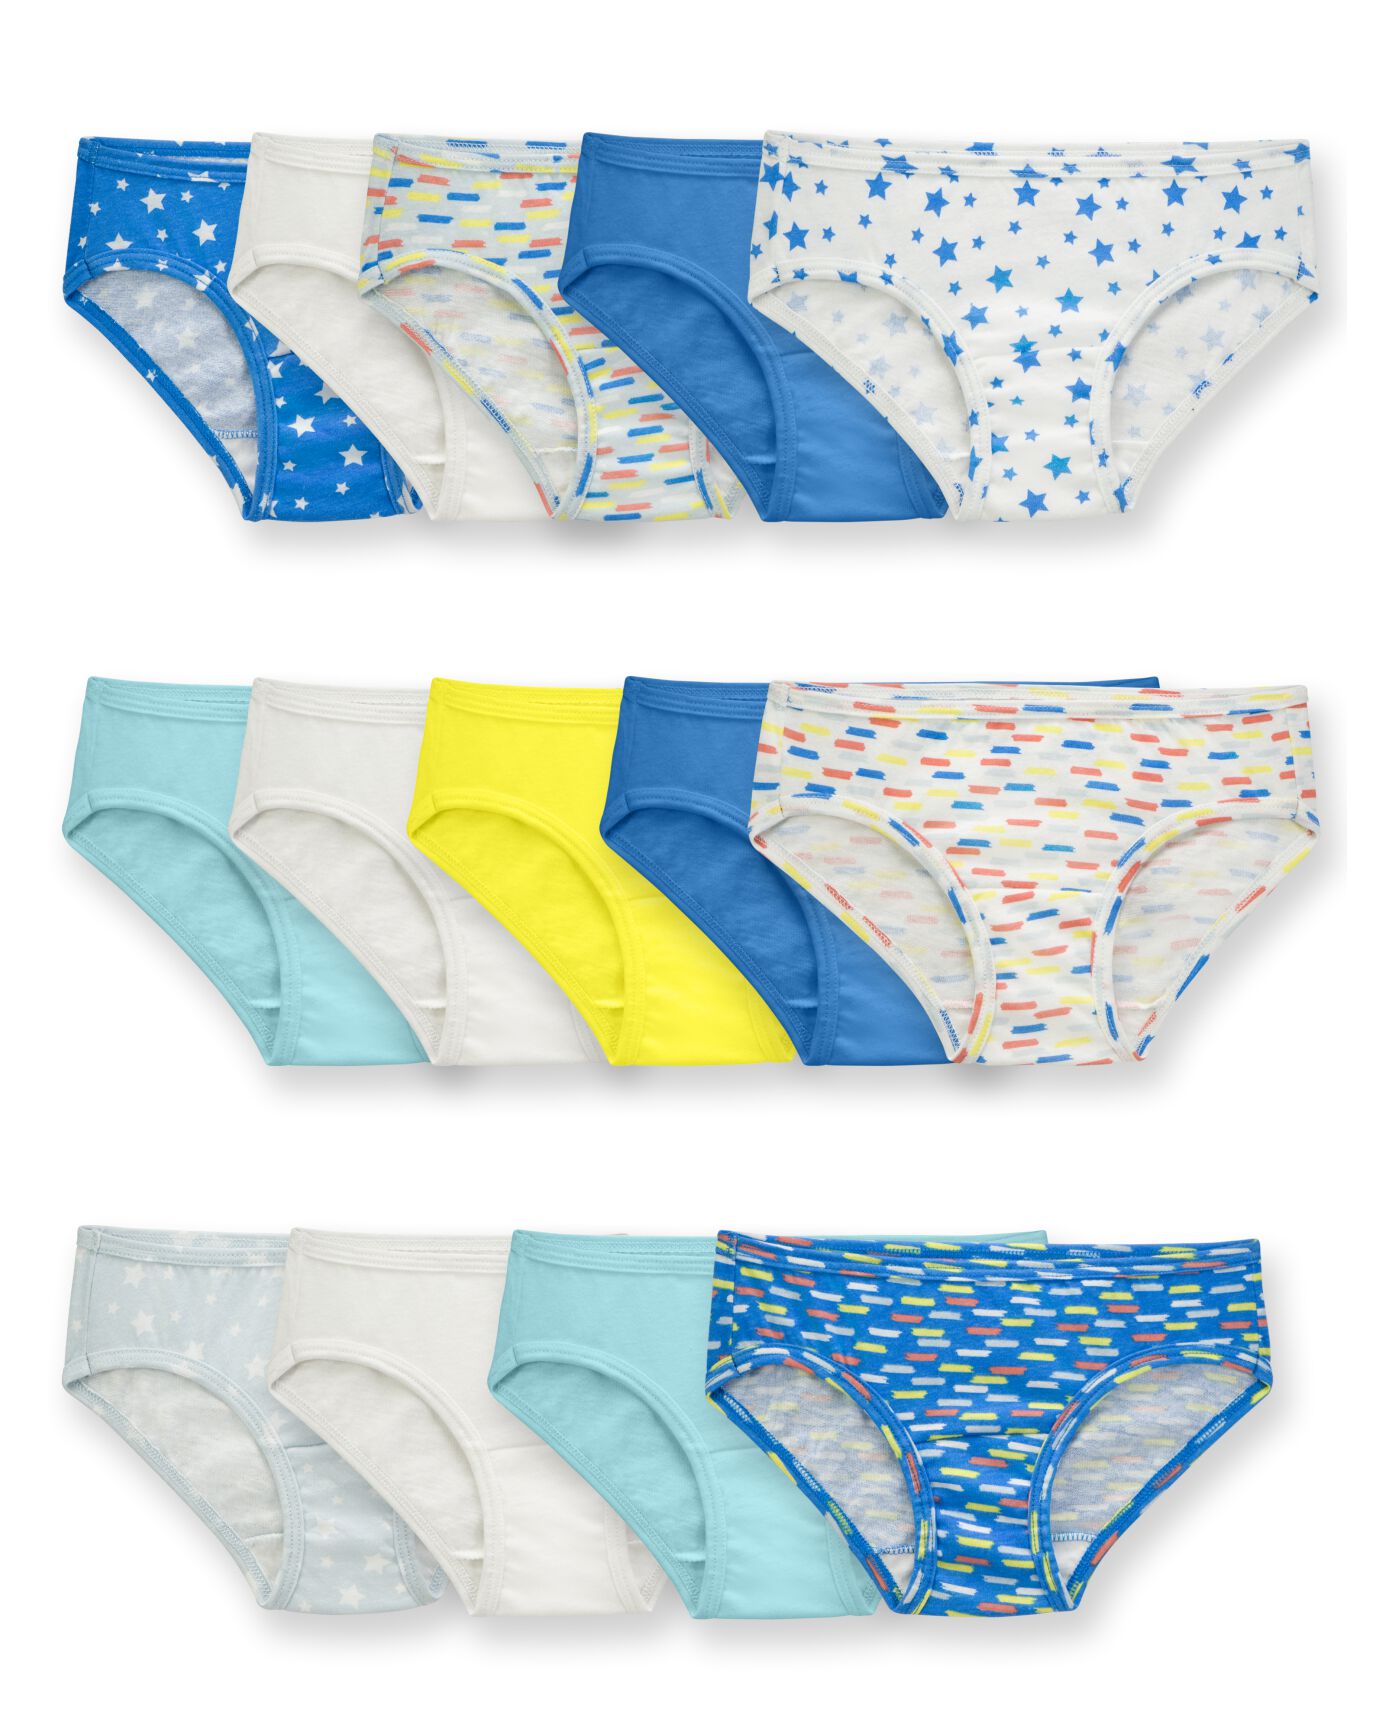 Fruit of the Loom Girls' Assorted Cotton Brief Underwear, 14-Pack